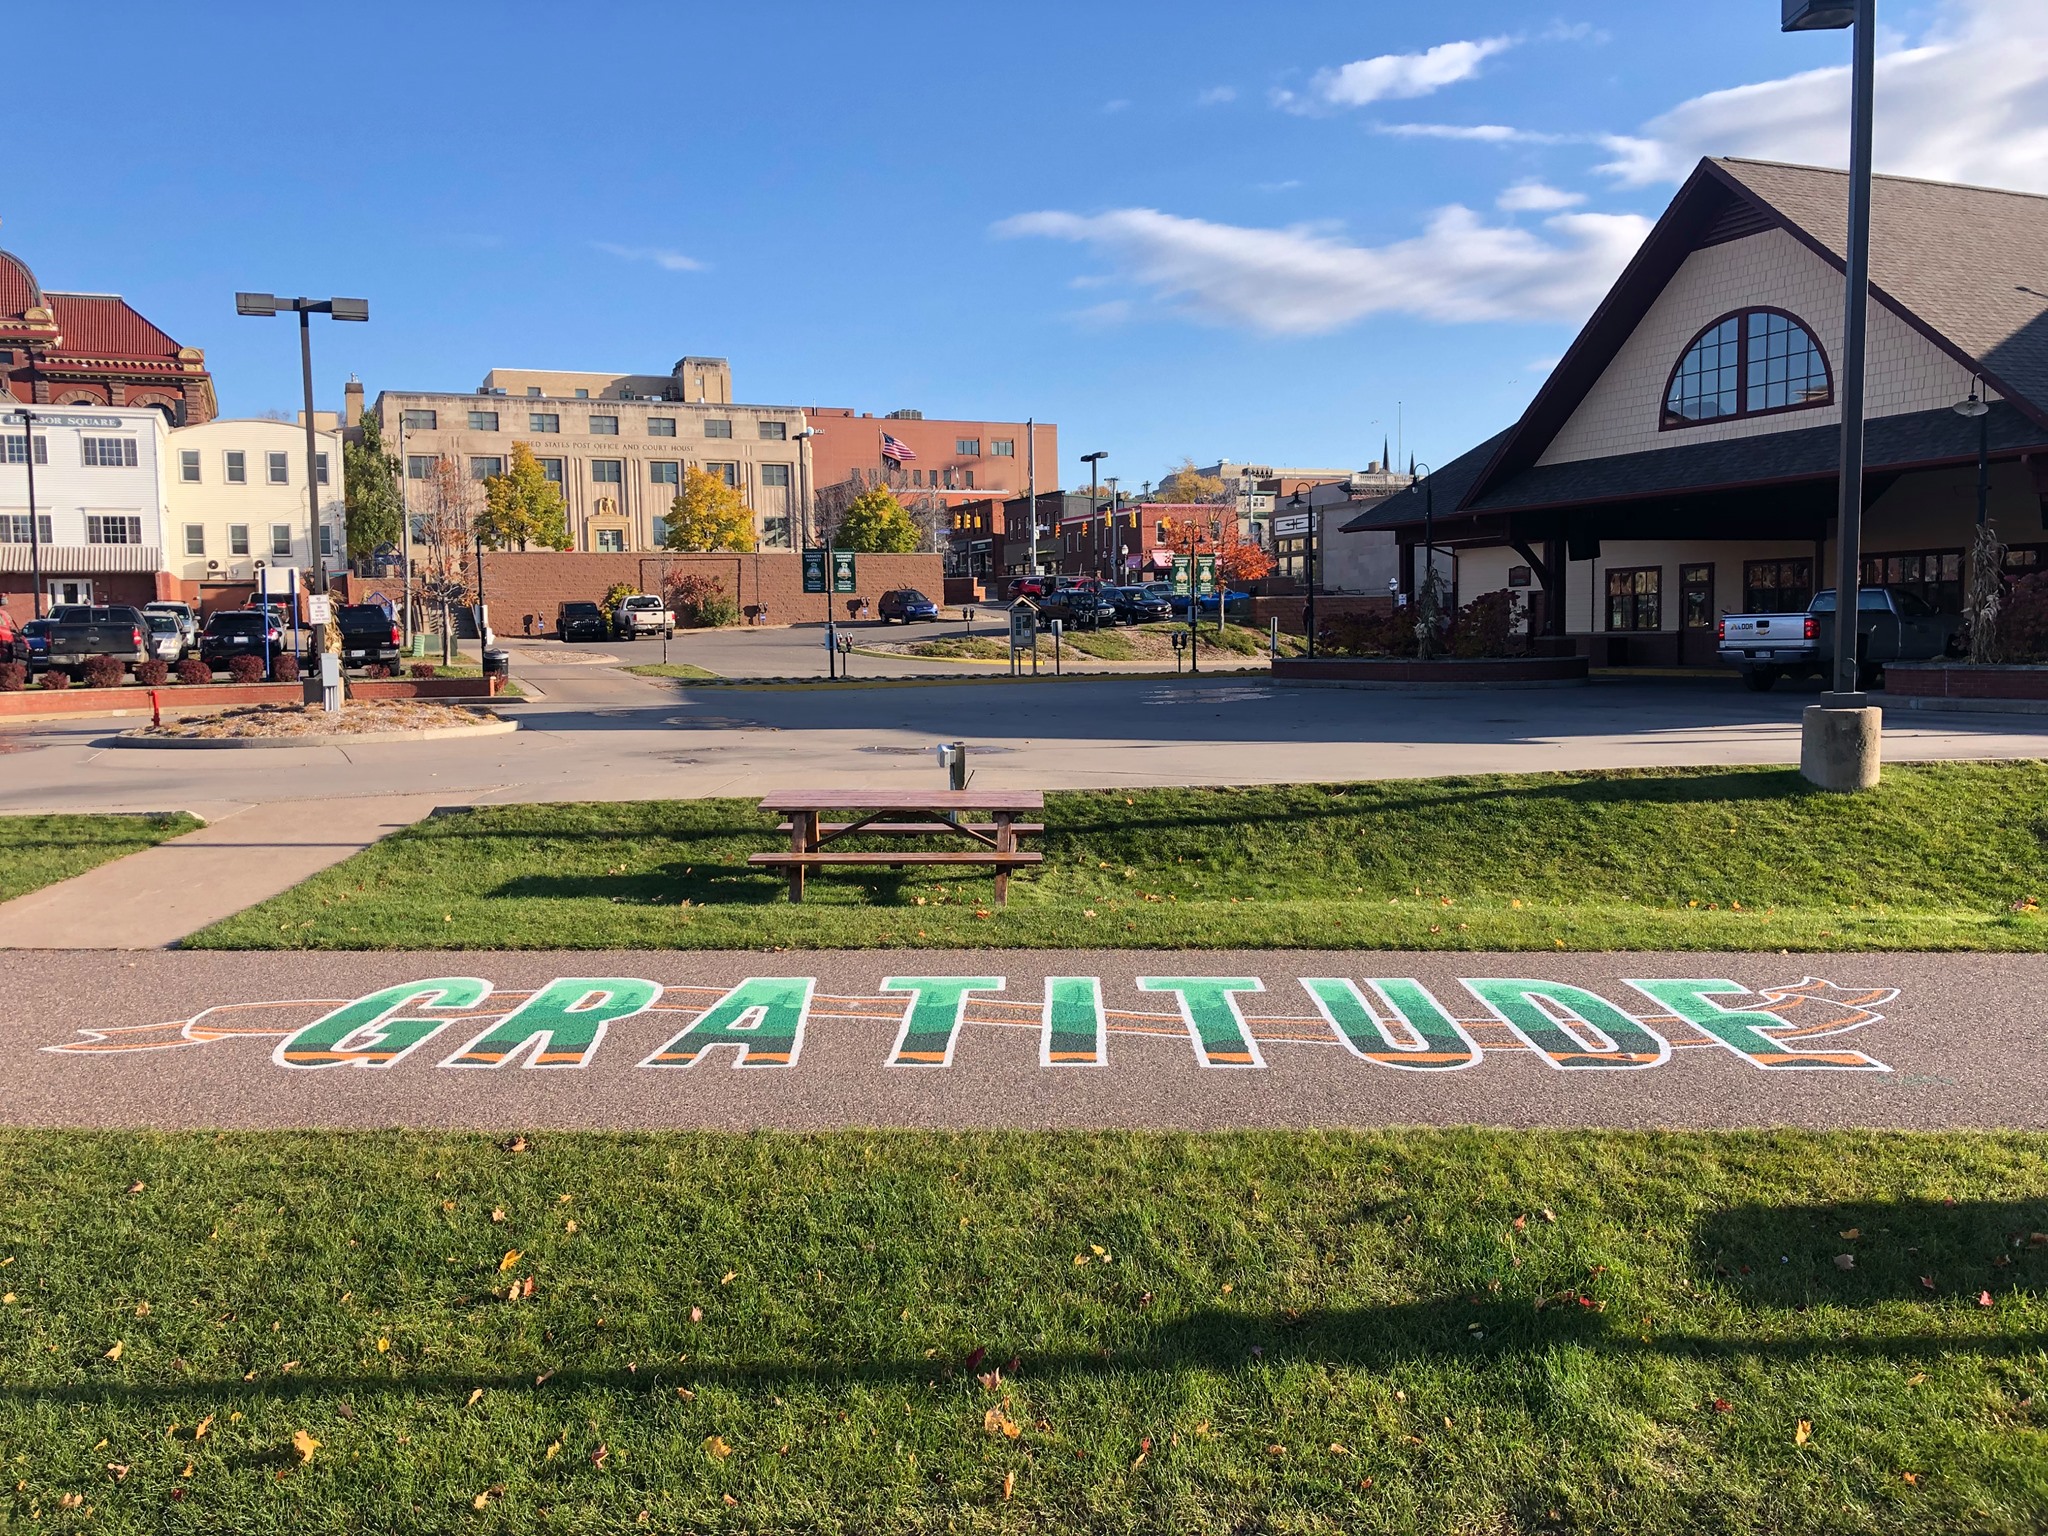 Gratitude Mural on the bike path in front of the Marquette commons